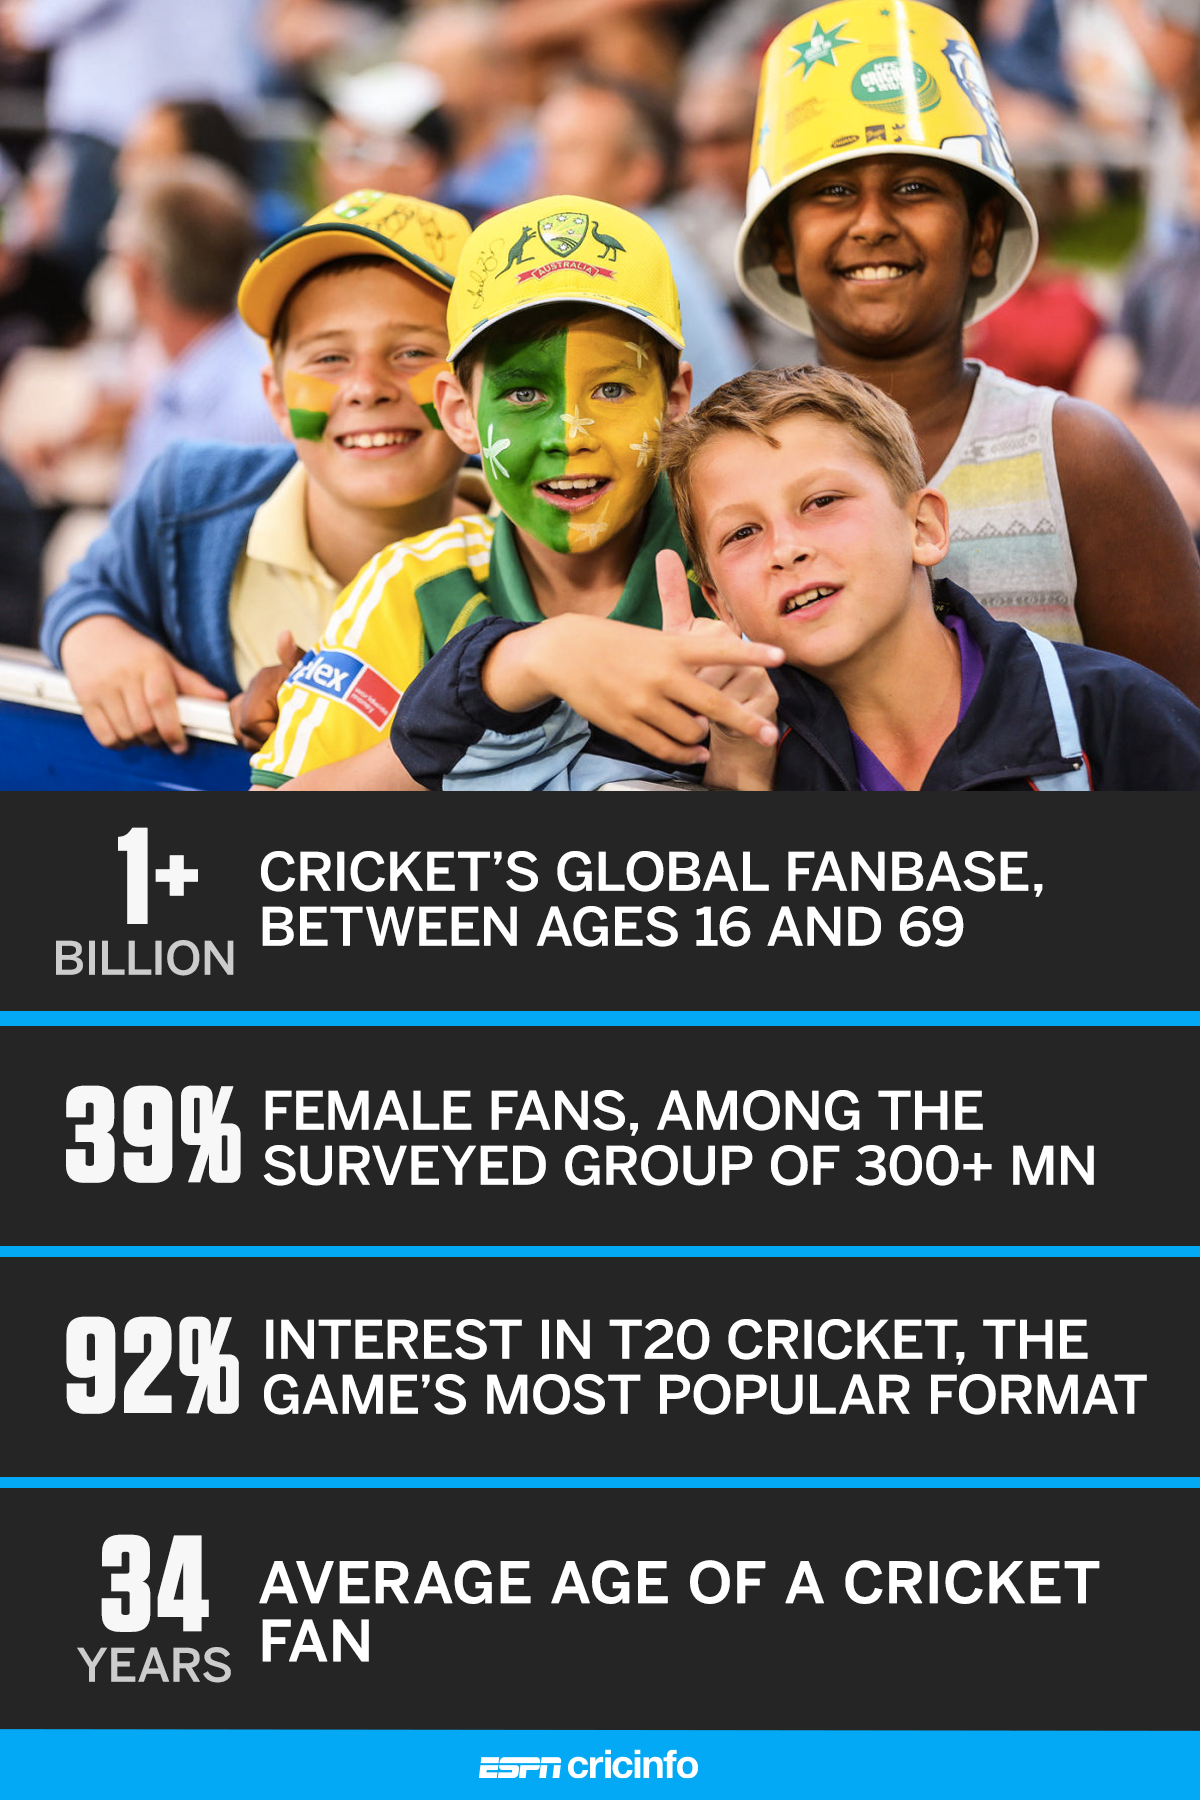 Graphic: Key findings from ICC's inaugural survey on the state of the game around the globe